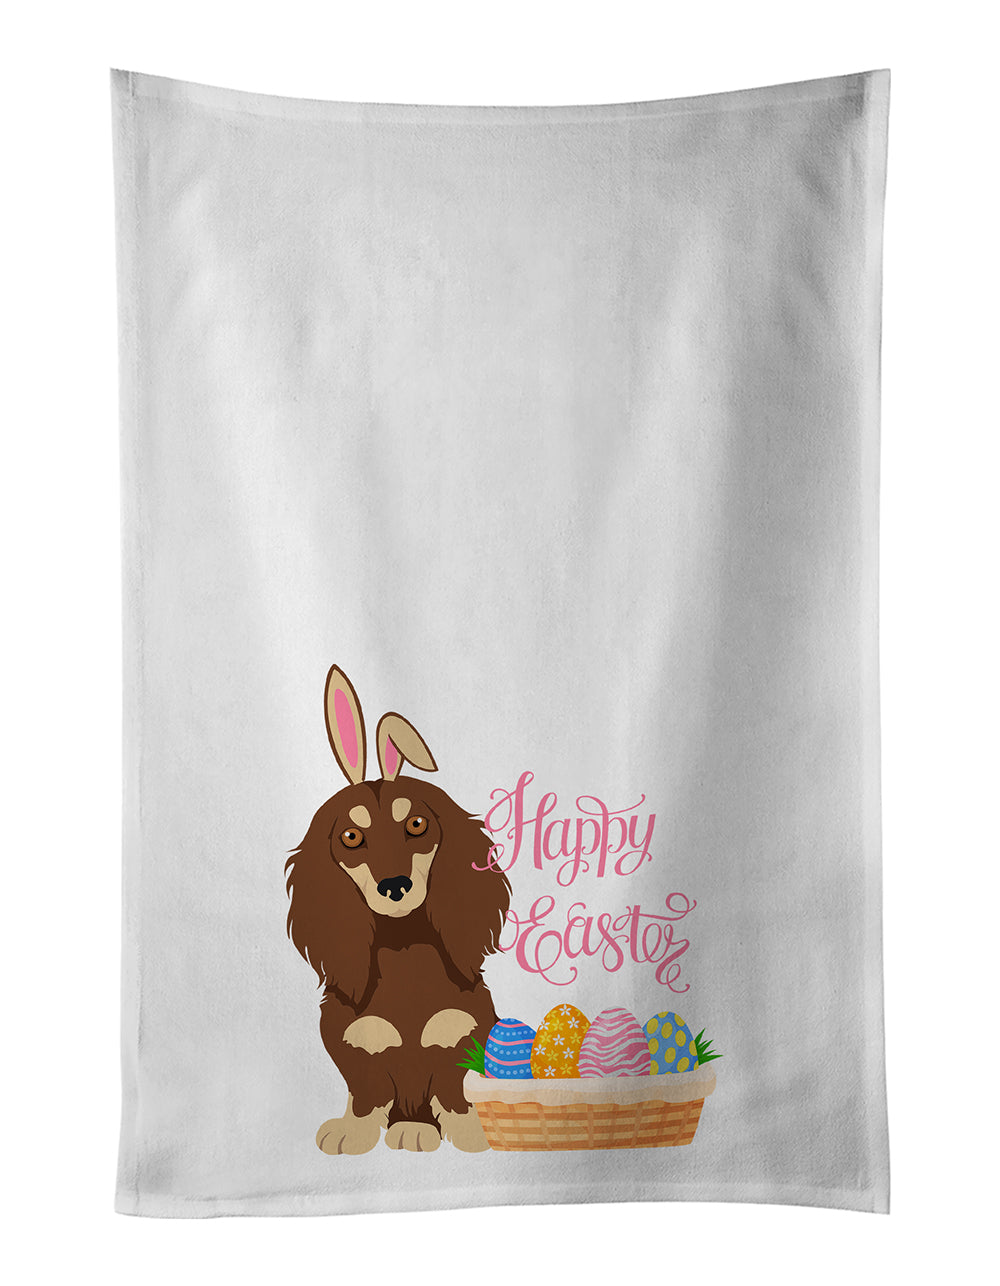 Buy this Longhair Chocolate and Cream Dachshund Easter White Kitchen Towel Set of 2 Dish Towels